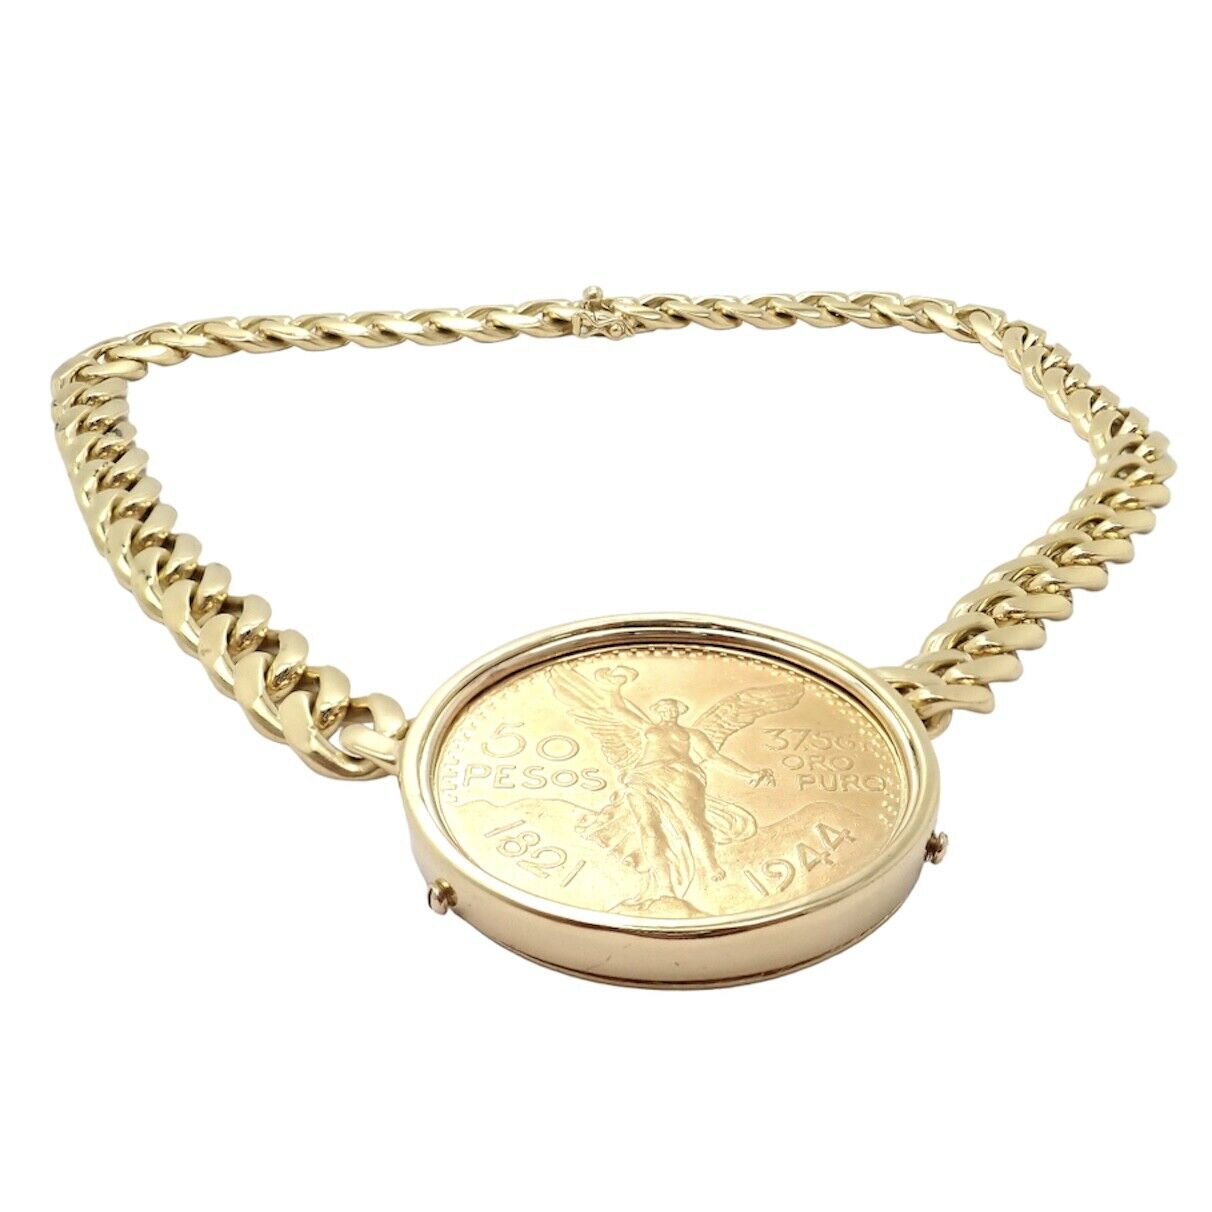 Bulgari Ancient Coin and Gold 'Monete' Necklace #bulgarimonete #bulgaricoin  #bulgarivintage #bulgarivintage #bulgarinecklace | Instagram